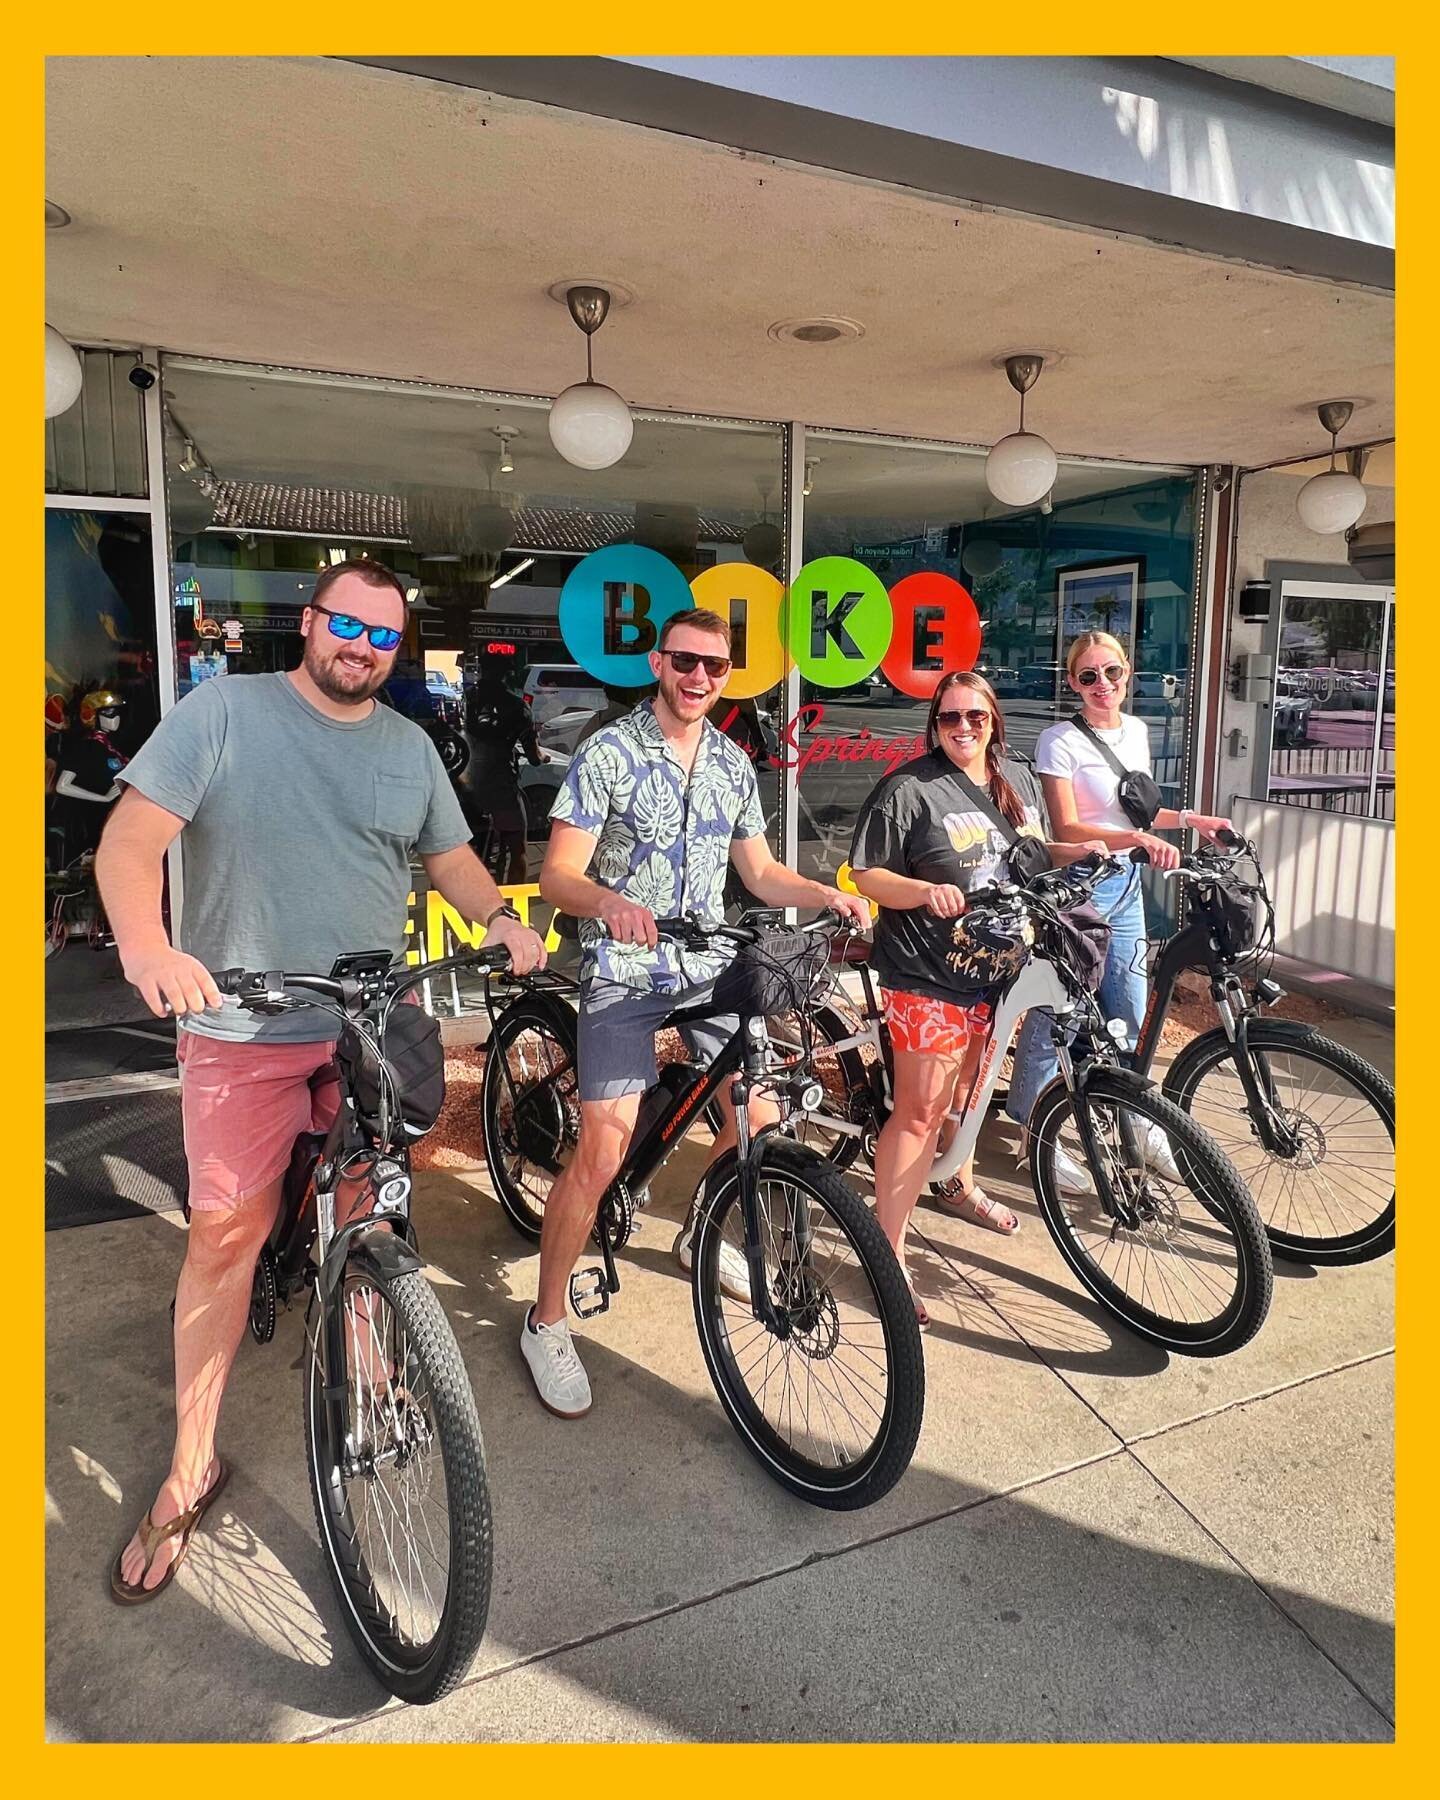 Hittin&rsquo; the street for #modernismweek ! 
So happy y&rsquo;all had a great time on our bikes! Would you do it again?! @xchristineth 
🌴☀️🚲🕶️💖🌵
.
.
.
#bikerental #bikeservice #bikeride #modernismweekpalmsprings #socialdistancingride #cityofpa